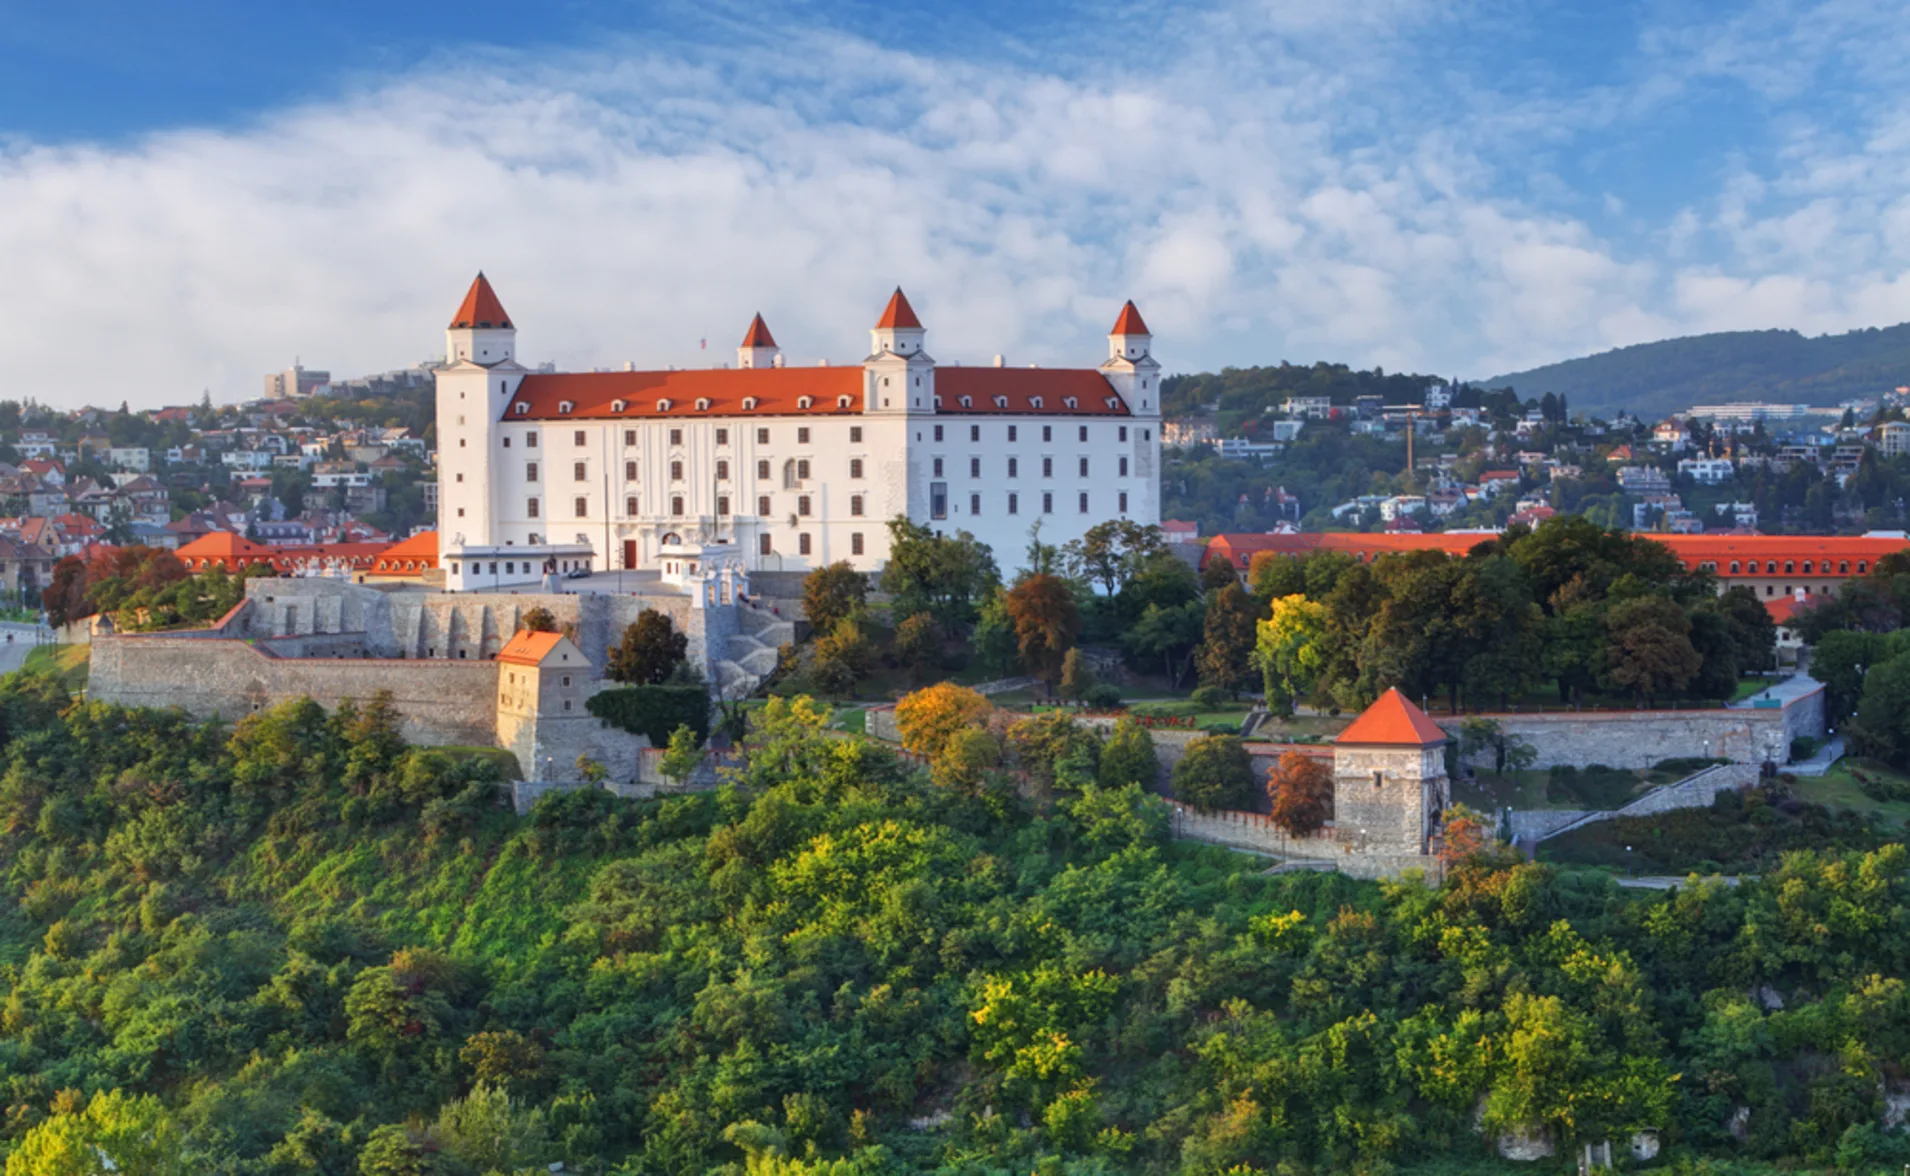 The white and red Bratislava castle on a hilltop